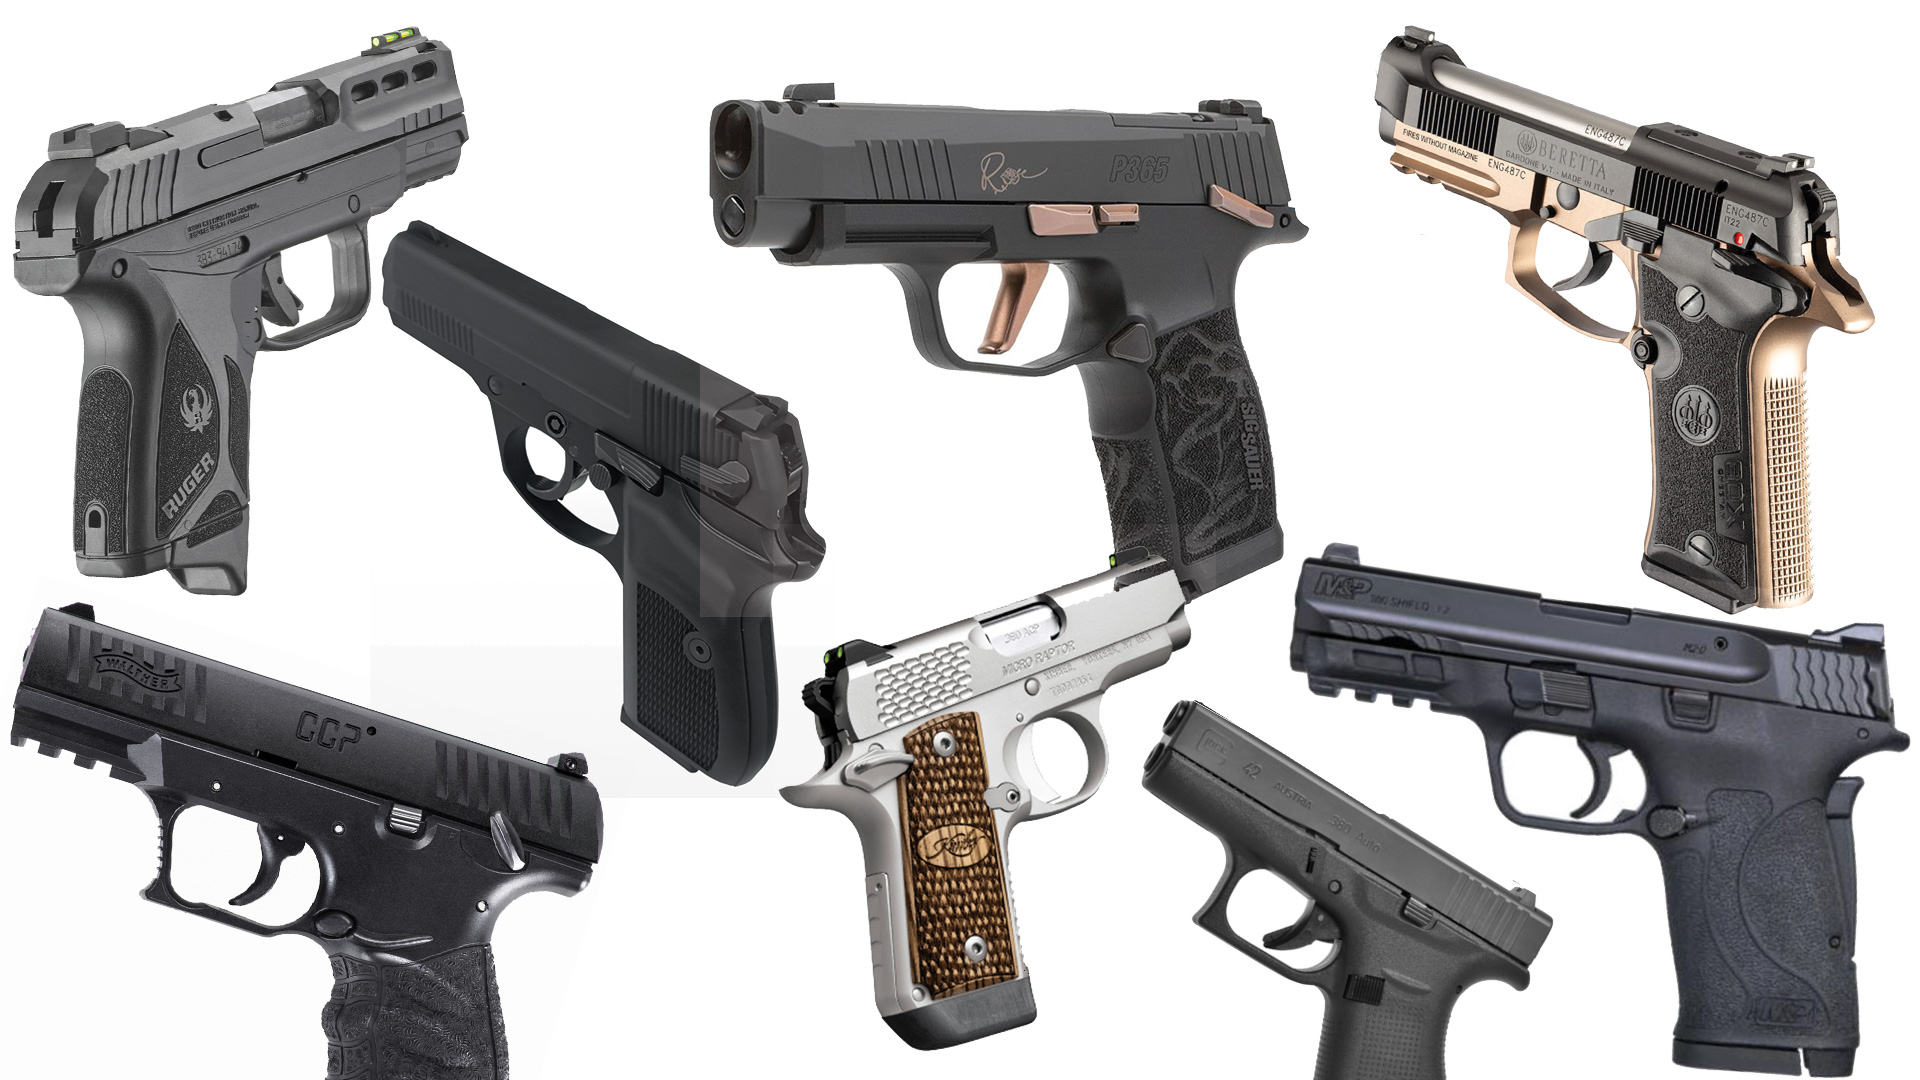 Miniature .380 Pistols is Go-To Hand Gun for…